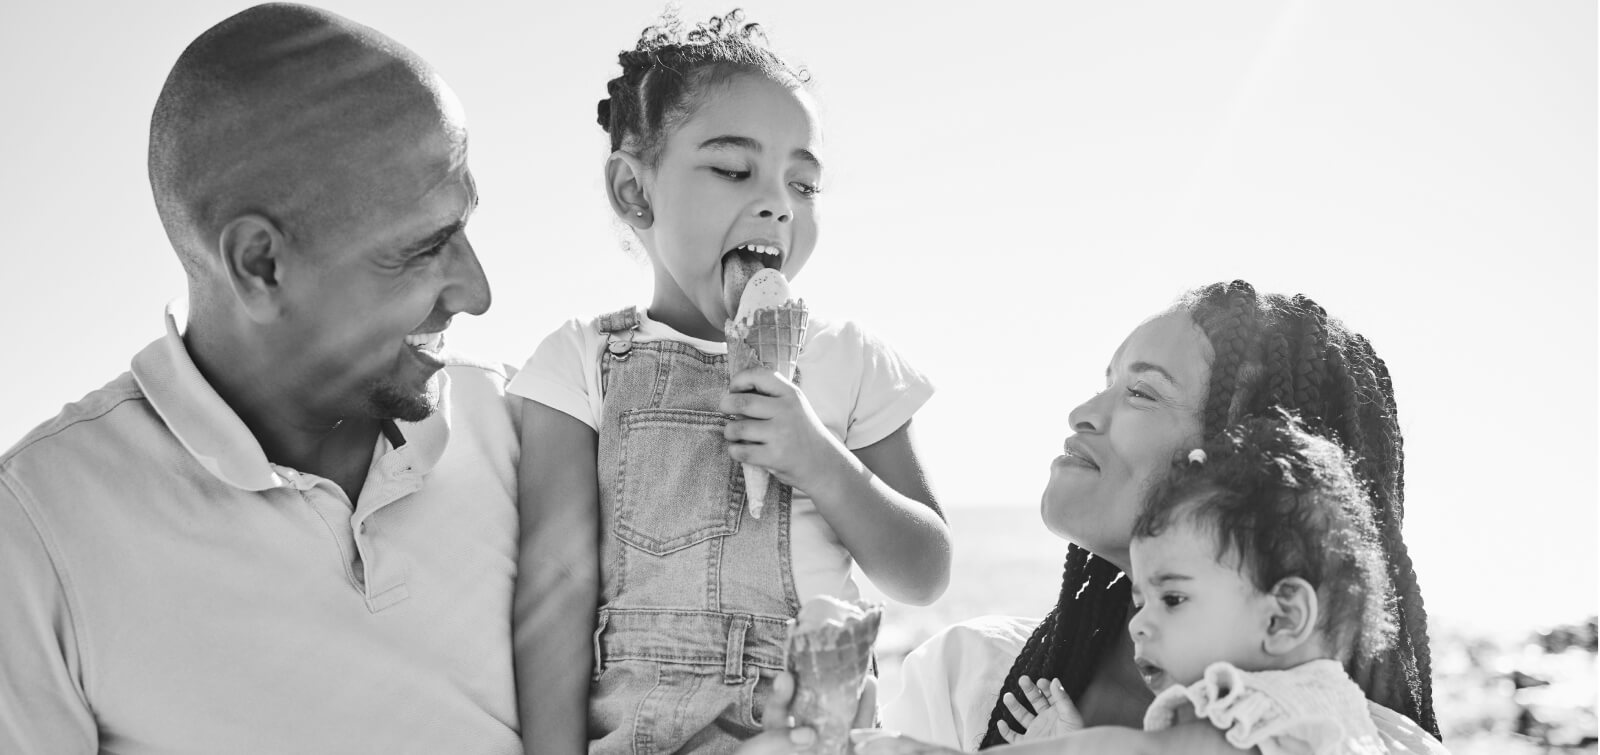 Family outside together smiling while their daughter eats ice cream